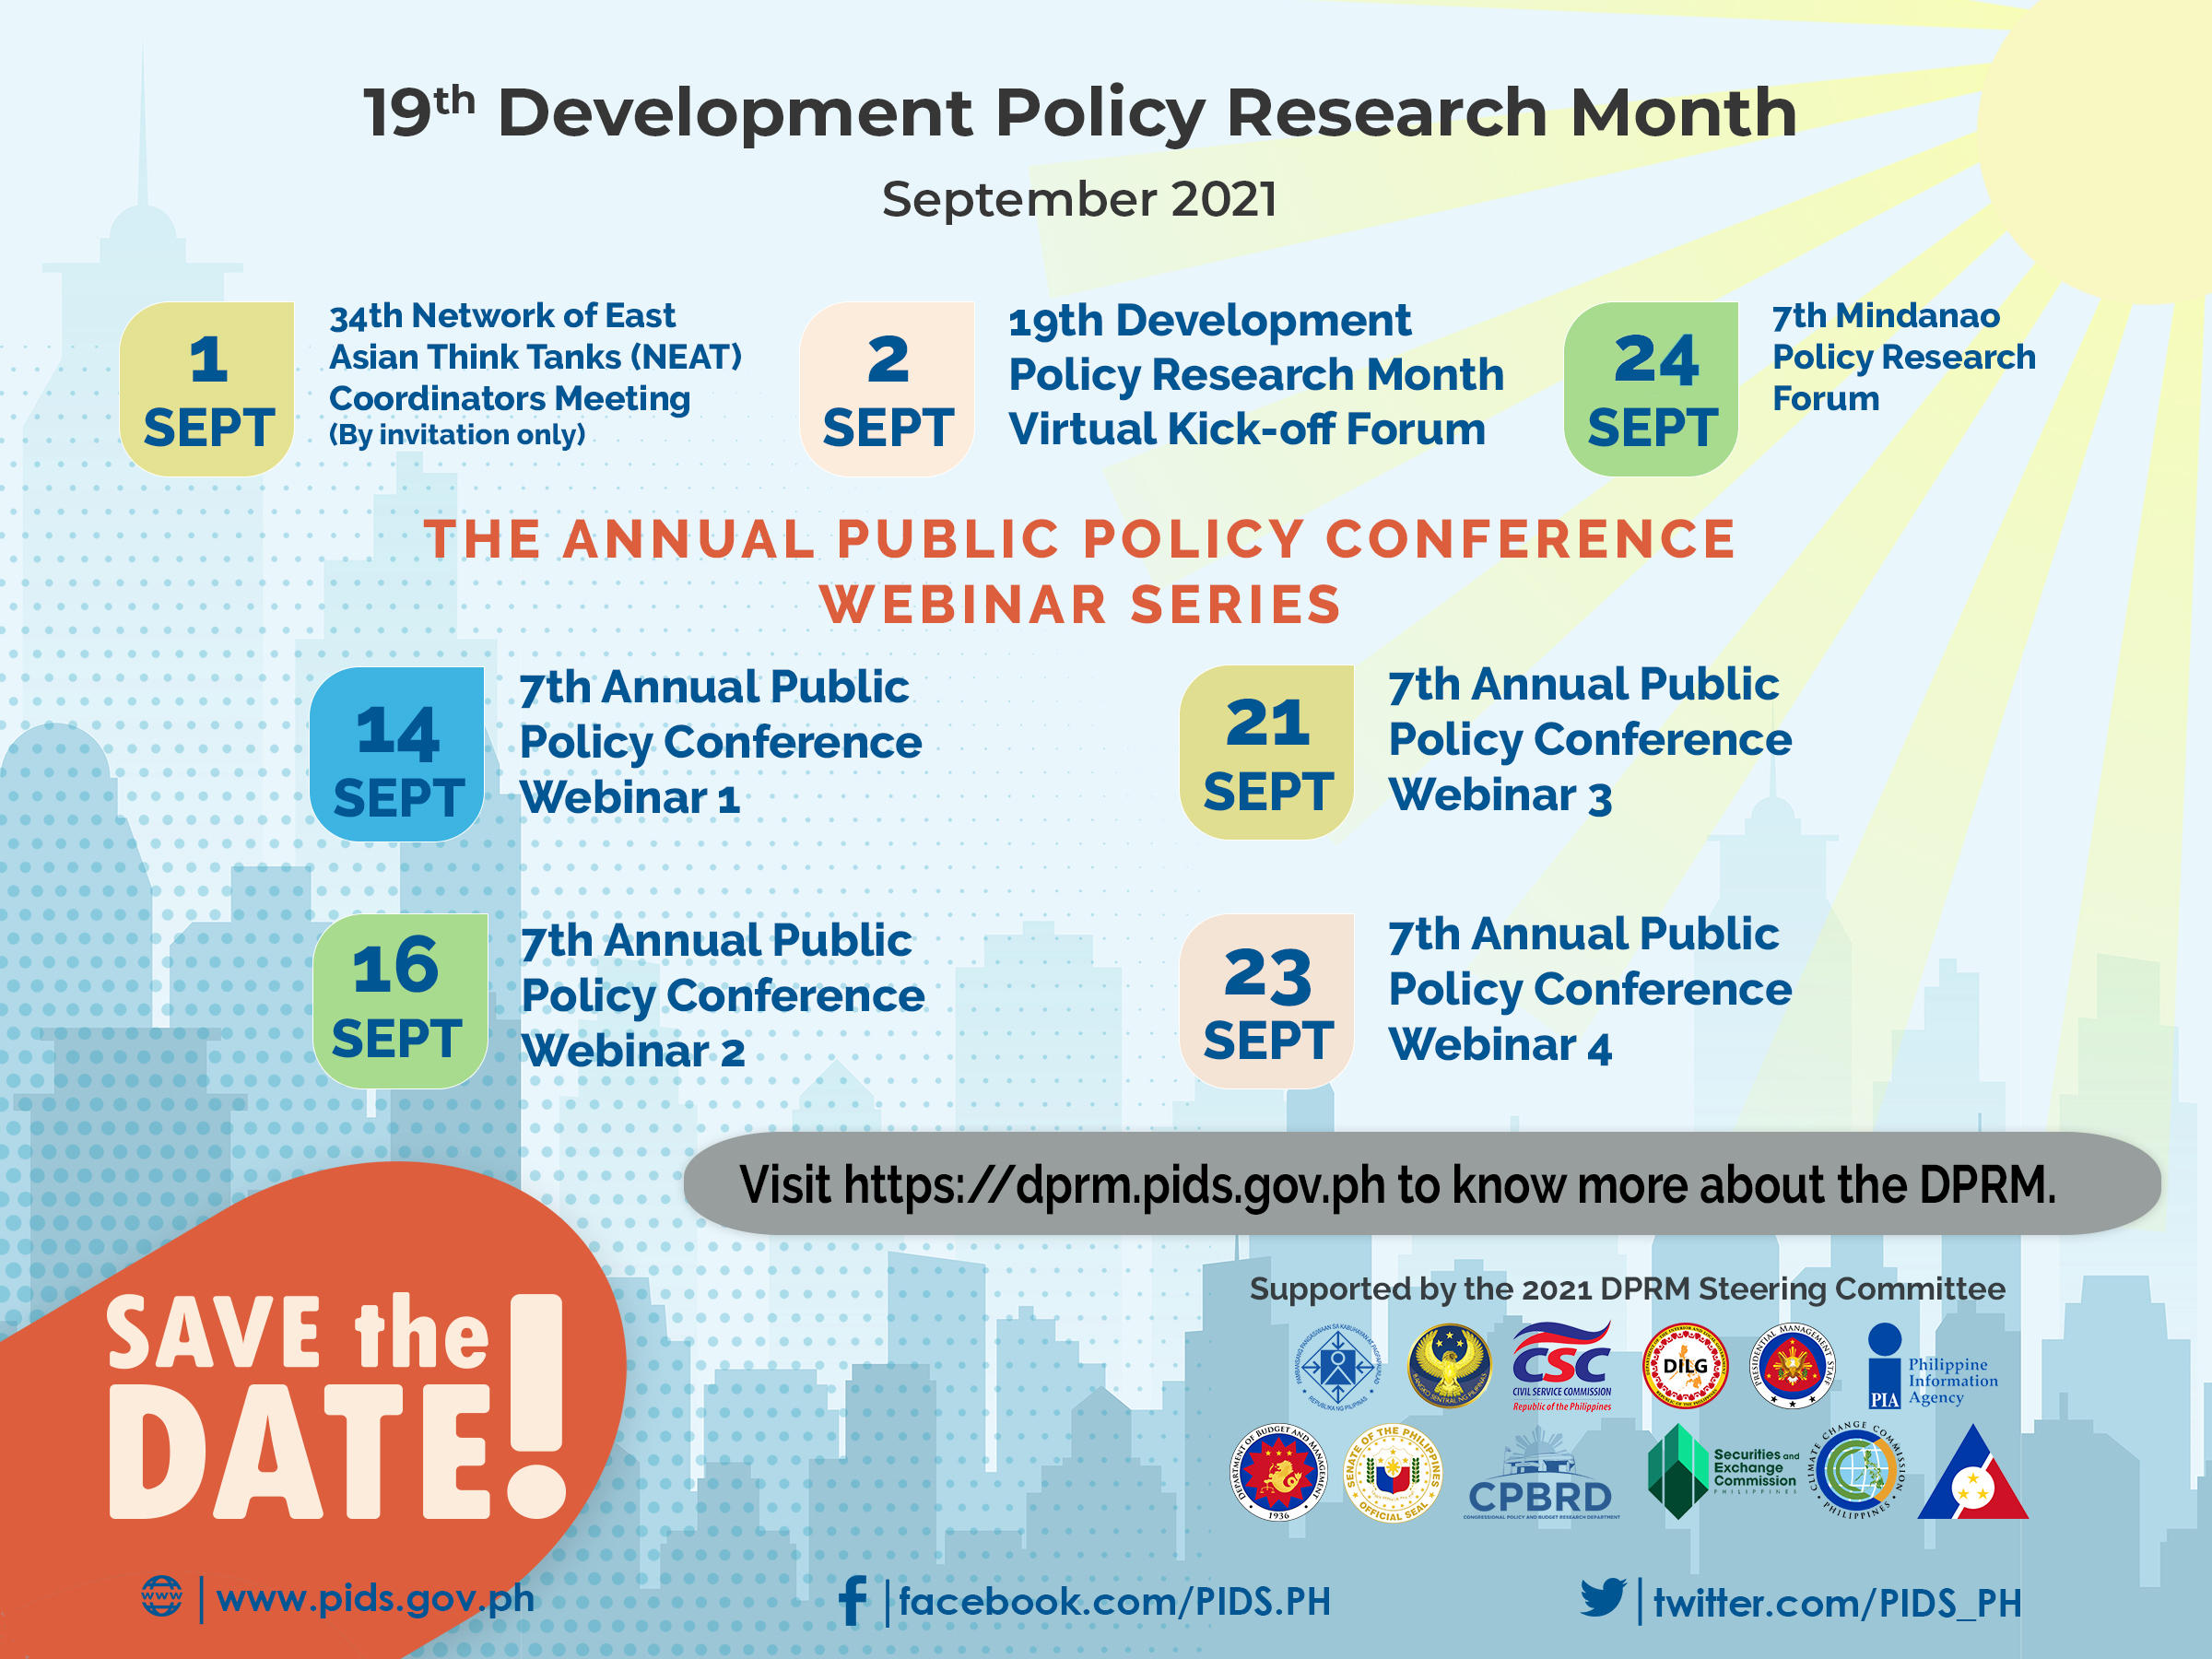 Save the Date: 19th Development Policy Research Month (DPRM) Activities